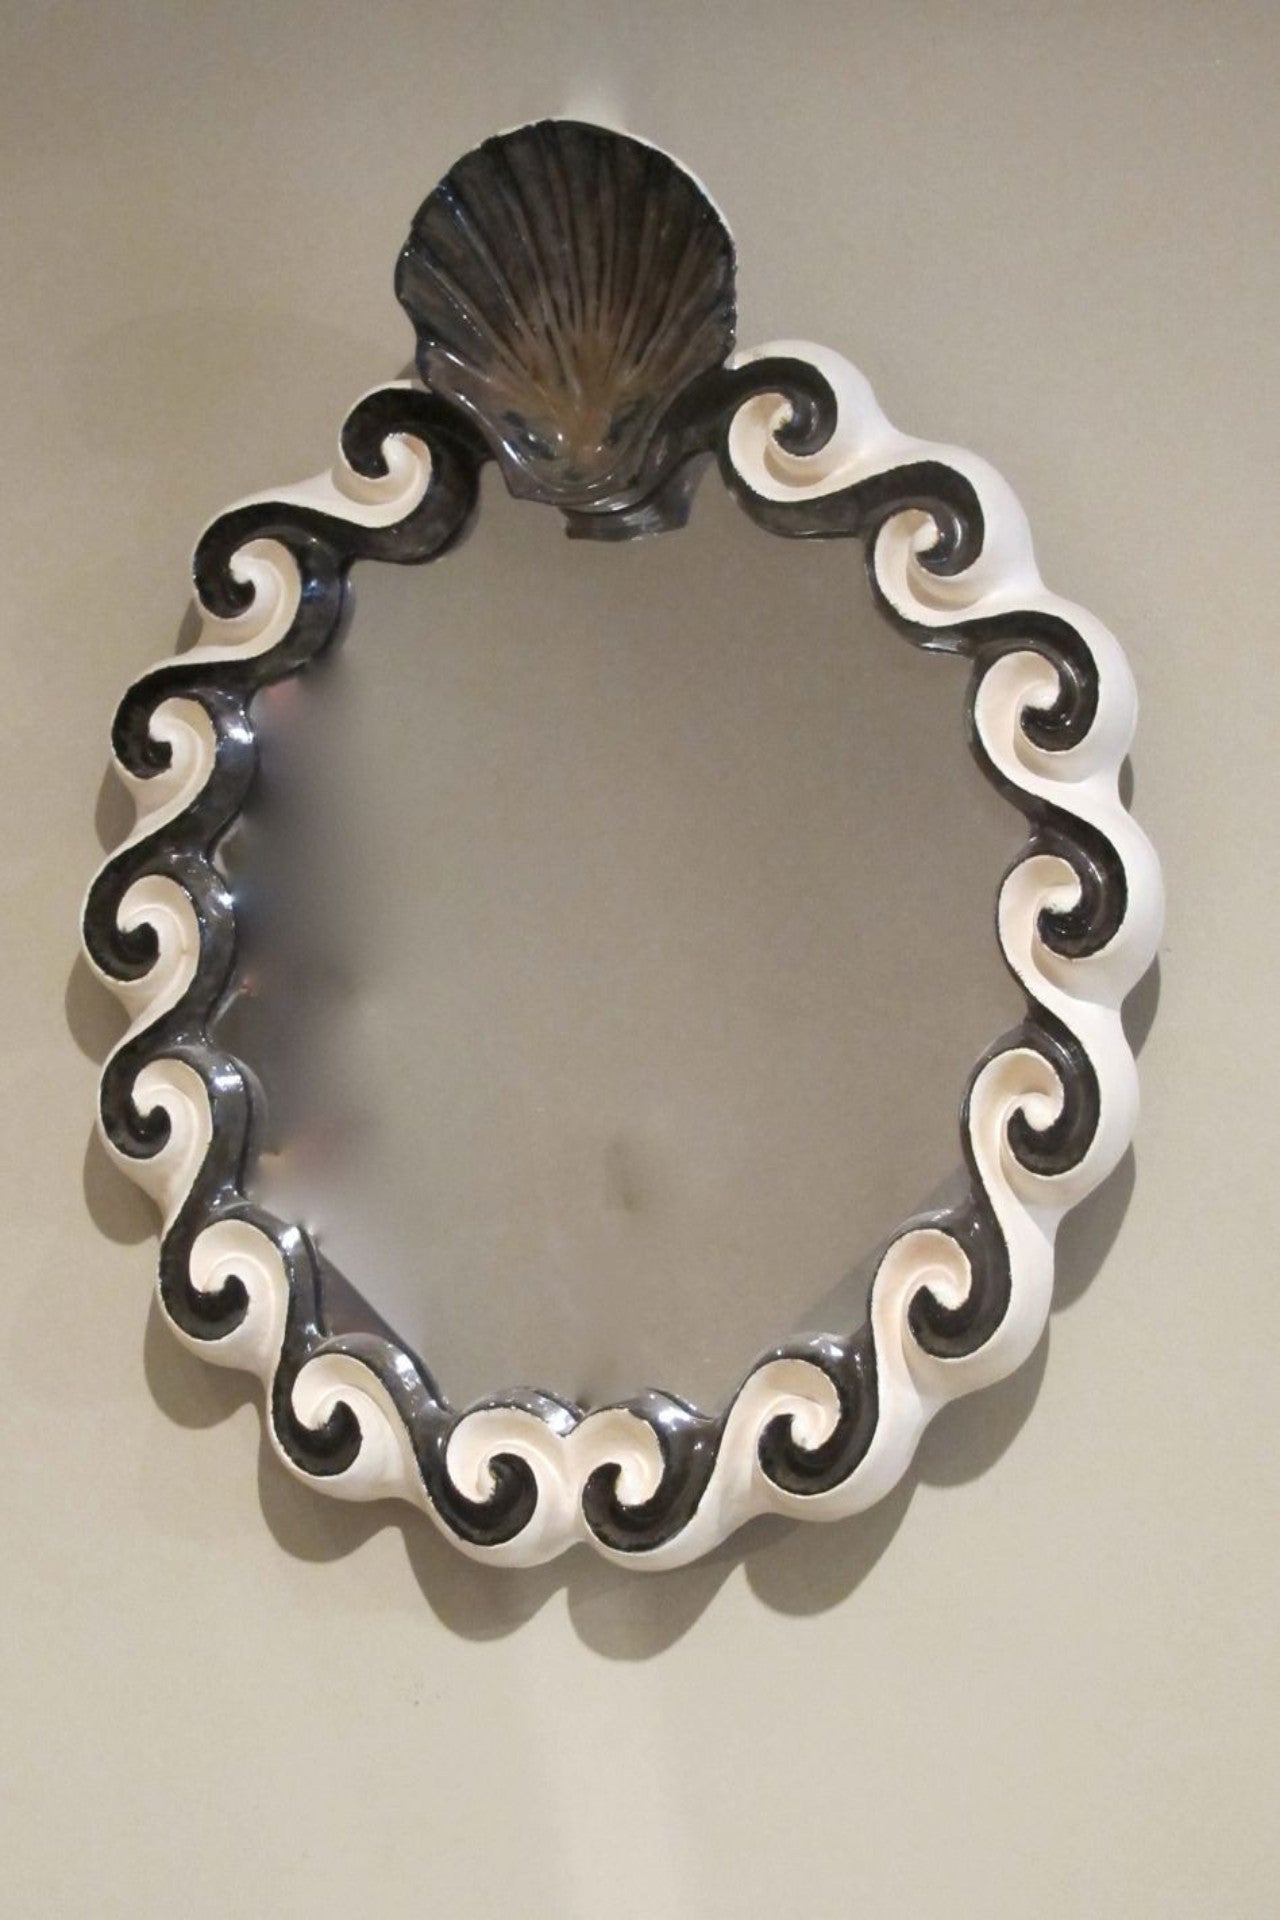 X Ceramic mirror with shell crest by G.Dooley.